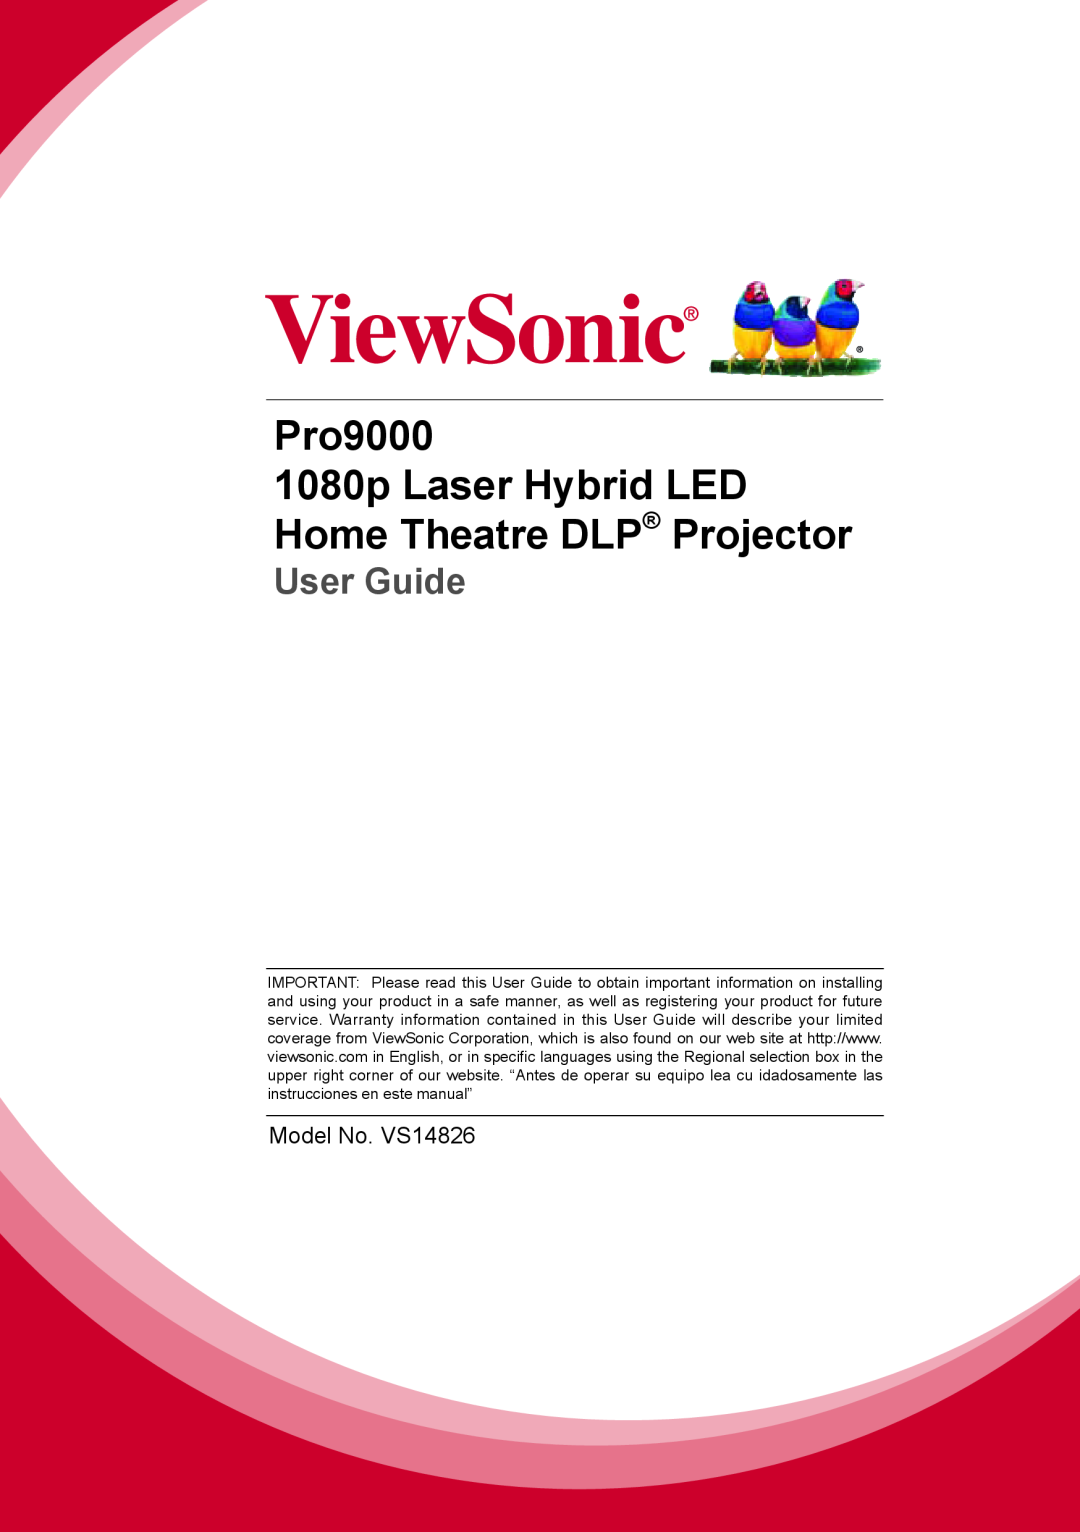 ViewSonic PRO9000 warranty Pro9000 1080p Laser Hybrid LED Home Theatre DLP Projector, User Guide 